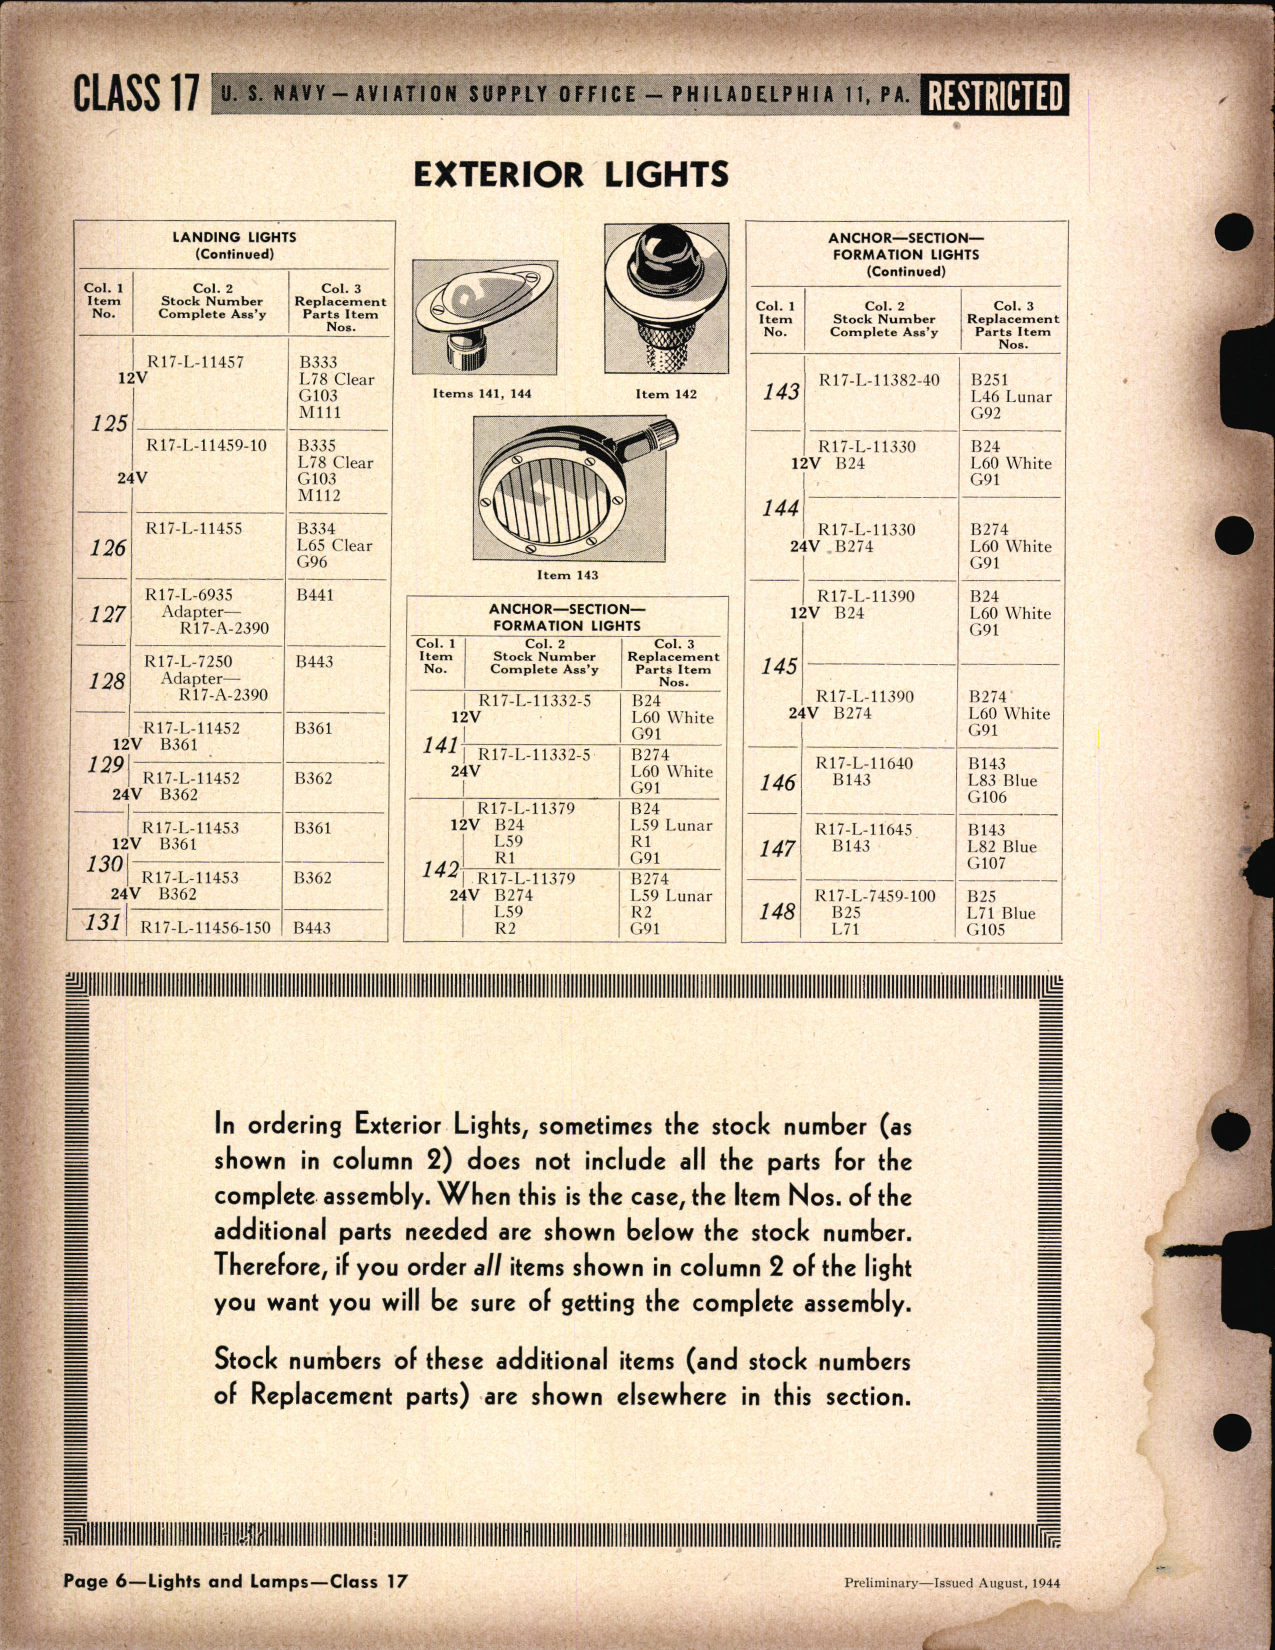 Sample page 6 from AirCorps Library document: Lights and Lamps